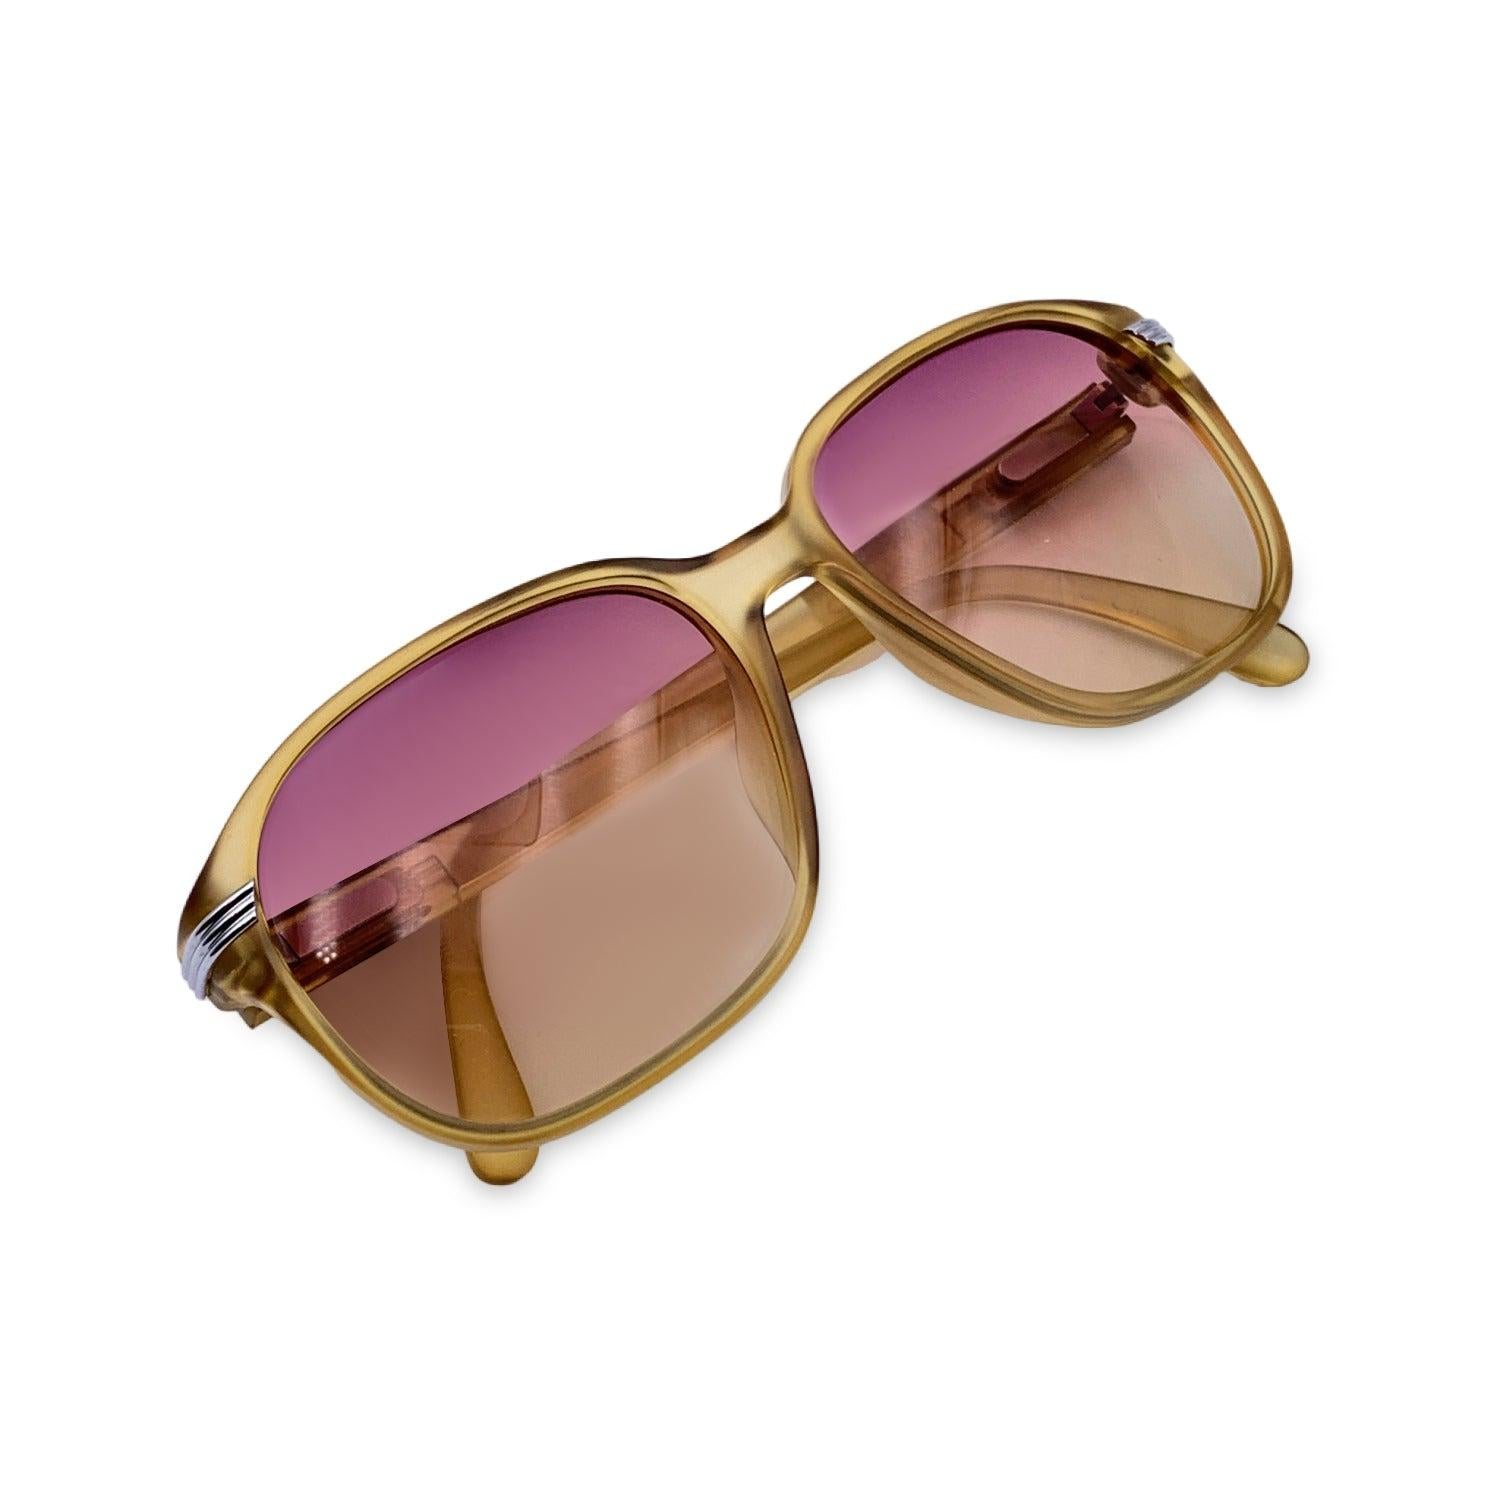 Vintage Christian Dior Monsieur Unisex Sunglasses, Mod. 2432 70 Size 56/16 140mm. Honey yellow semi transparent Optyl frame. 100% Total UVA/UVB protection purple bi-color gradient lenses. CD logos on the side of the temples. Details MATERIAL: